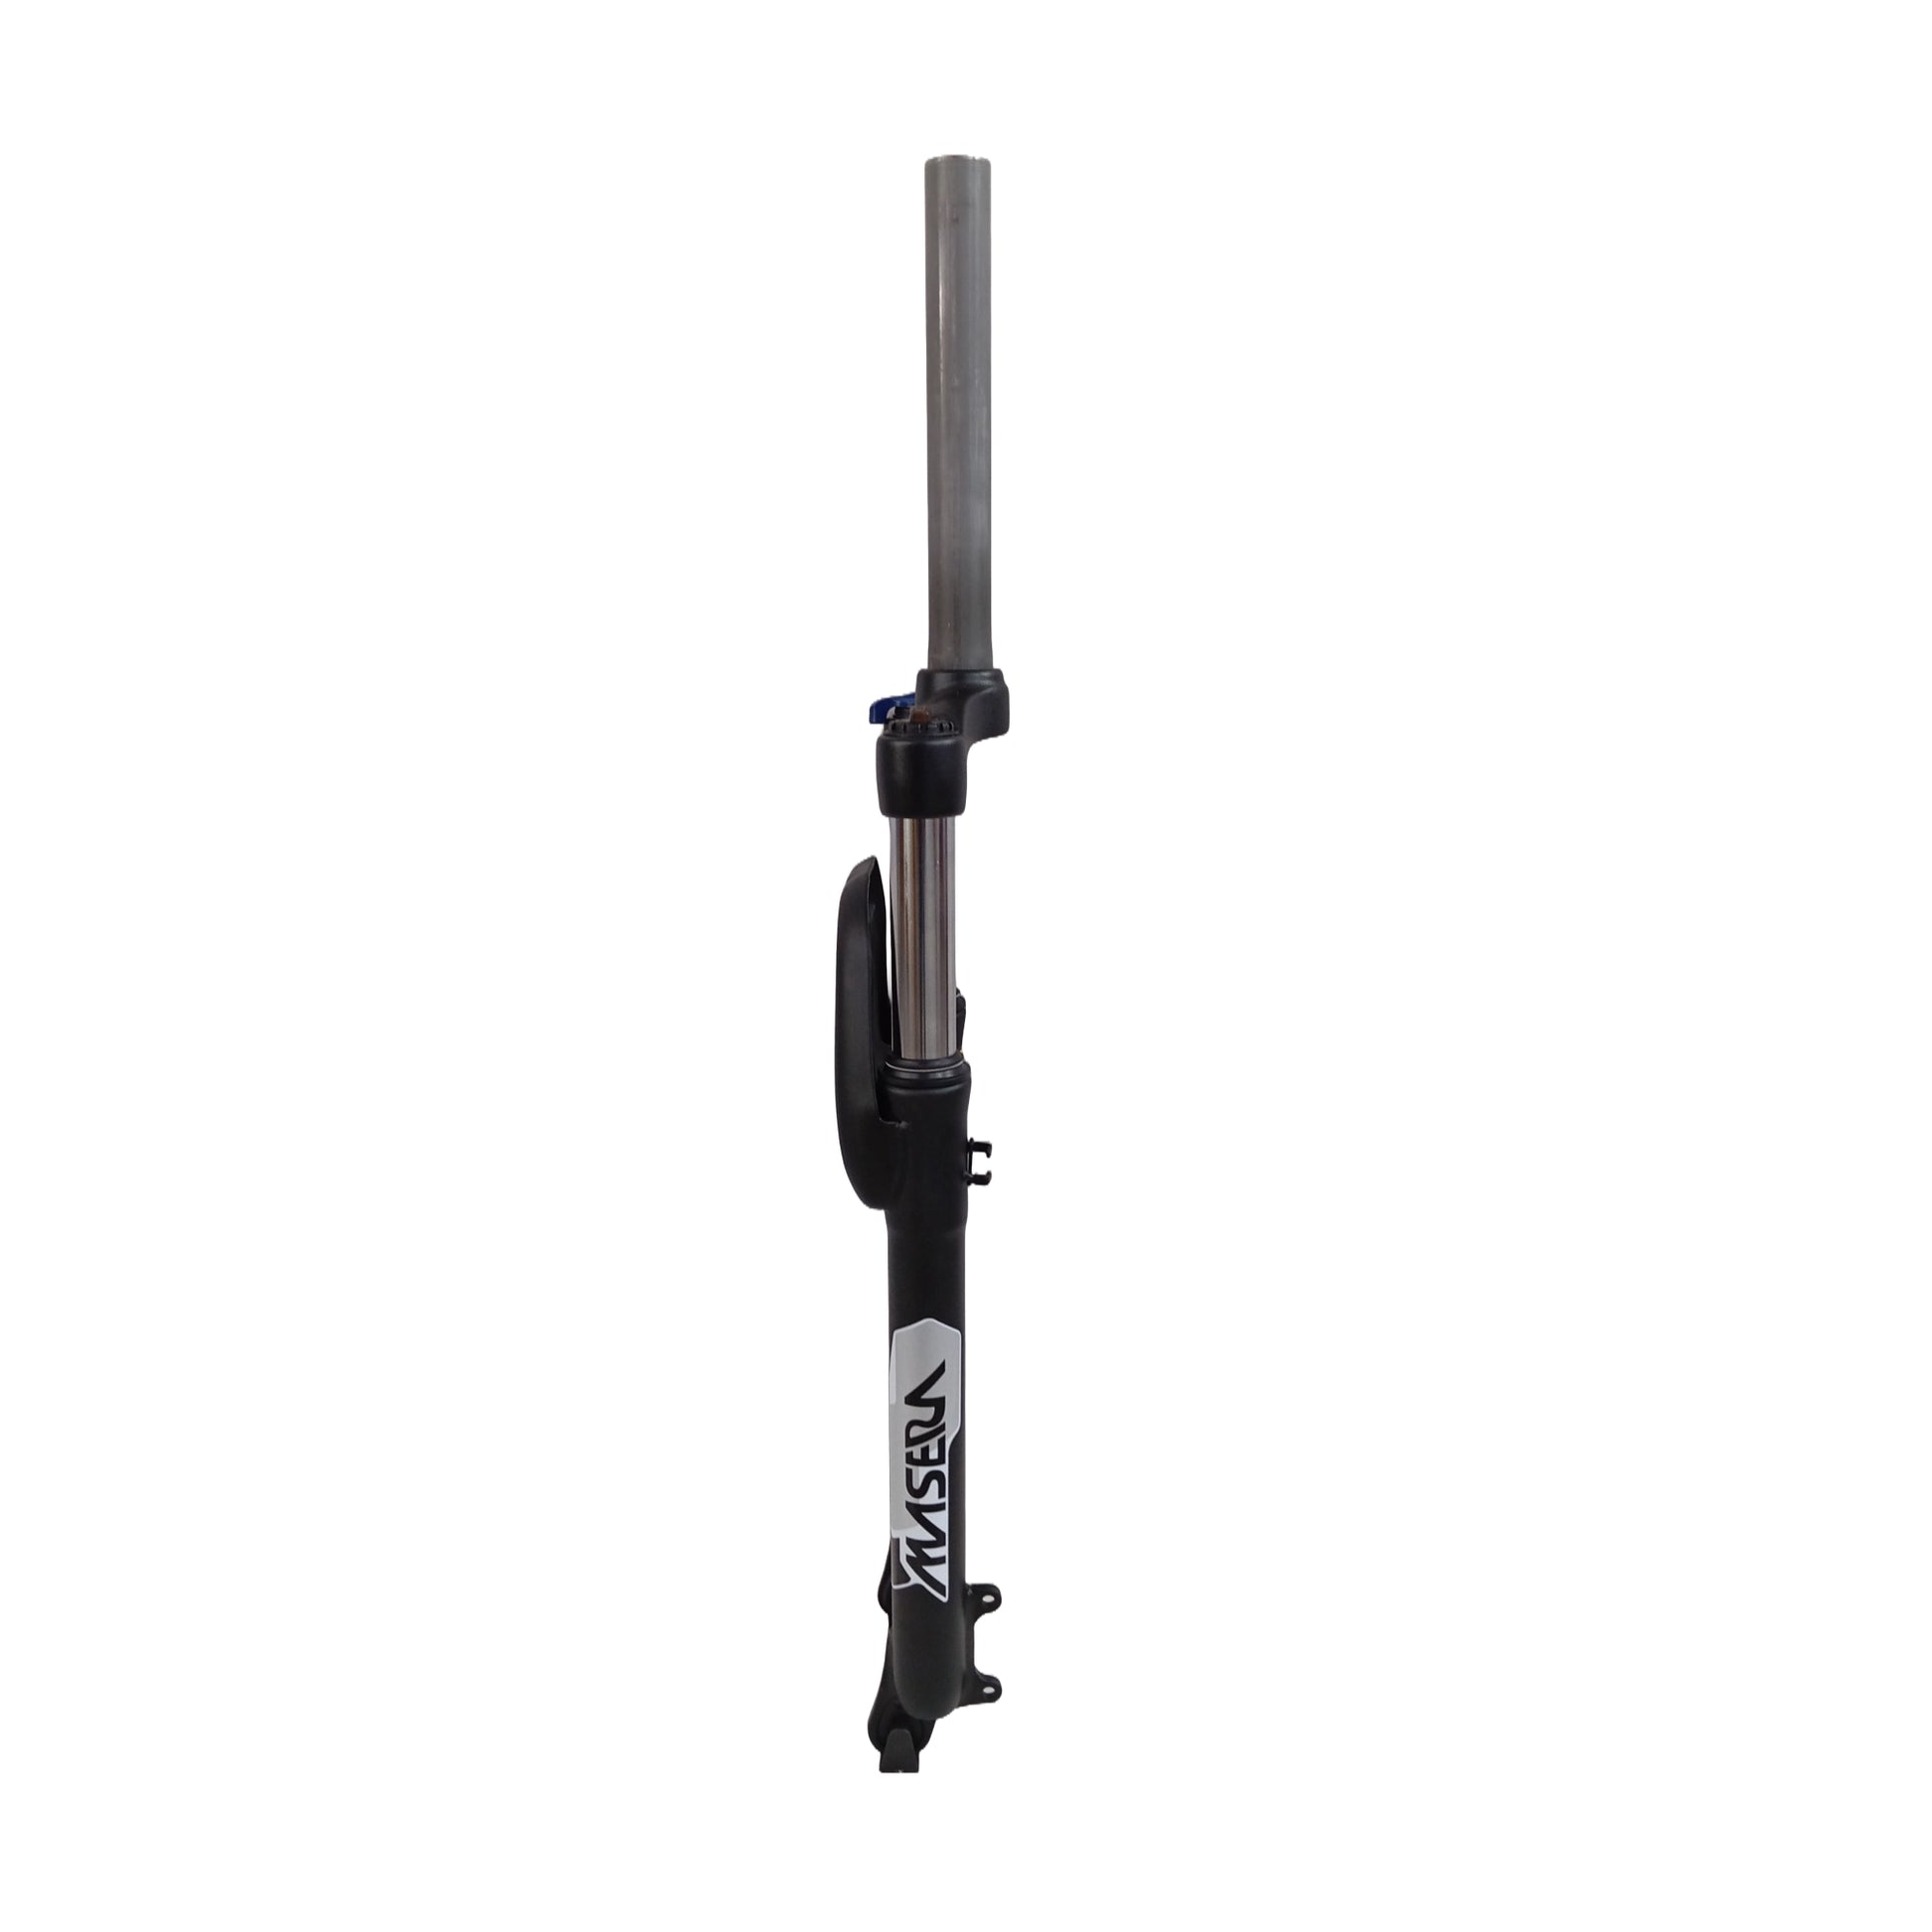 Bicycle Lockout Suspension Fork Zoom 389a (Masera) with 80 mm travel and mechanical lockout ,preload side view